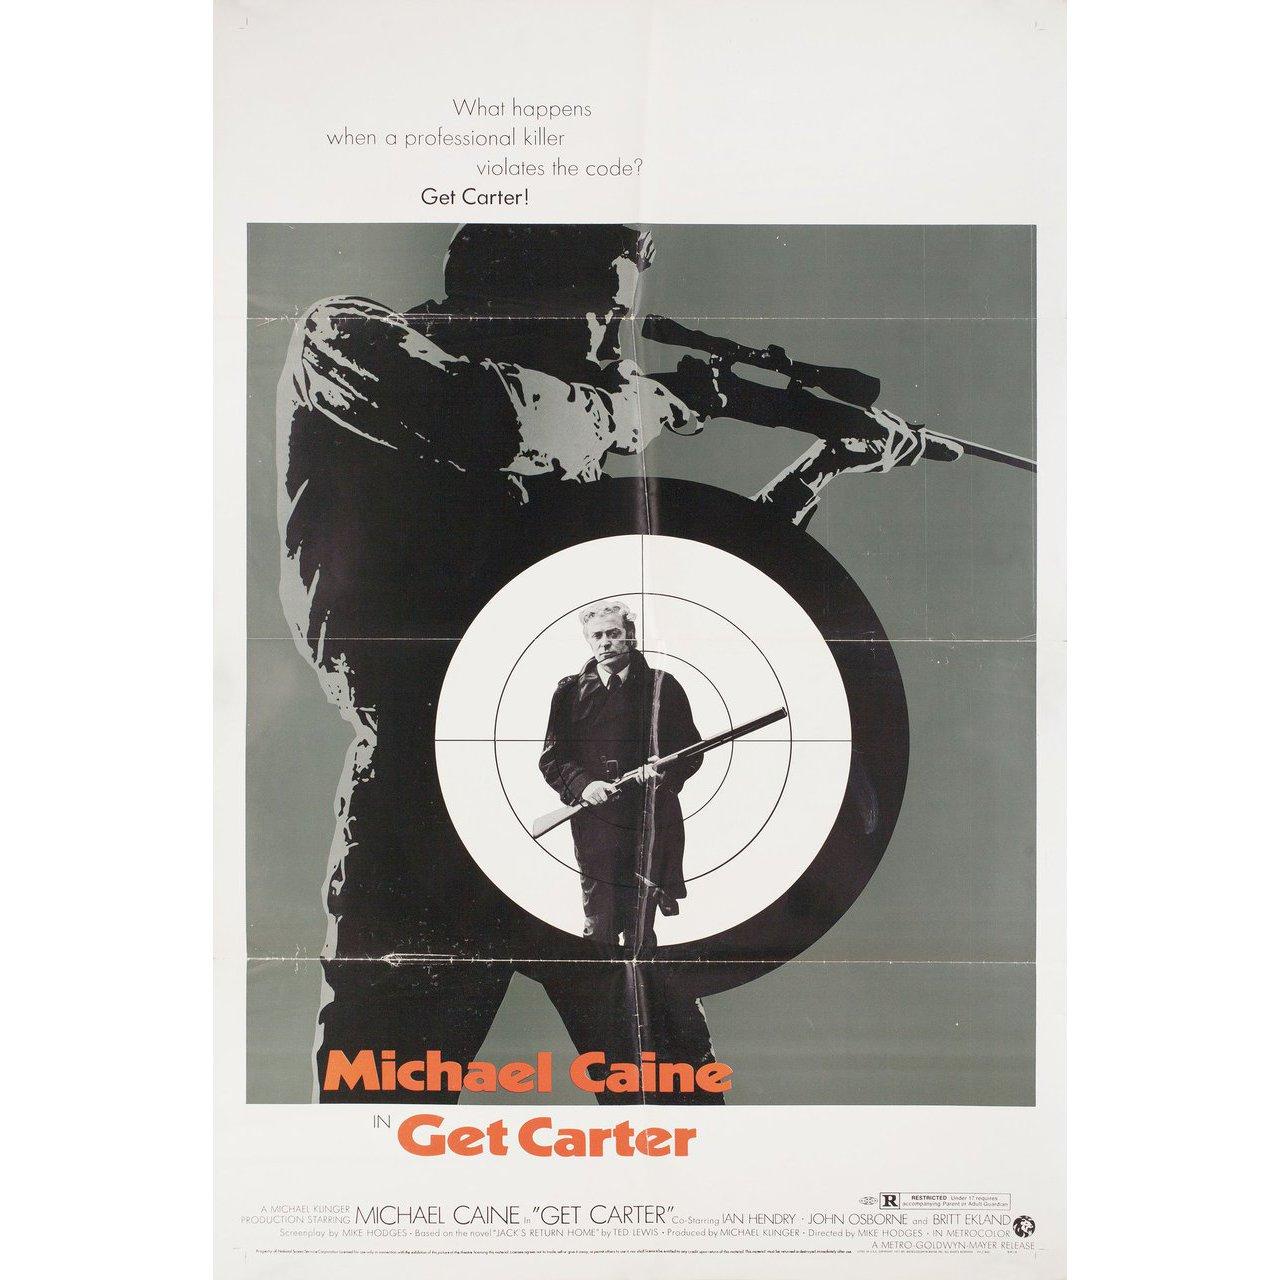 Original 1971 U.S. one sheet poster for the film Get Carter directed by Mike Hodges with Michael Caine / Ian Hendry / Britt Ekland / John Osborne. Very Good condition, folded. Many original posters were issued folded or were subsequently folded.